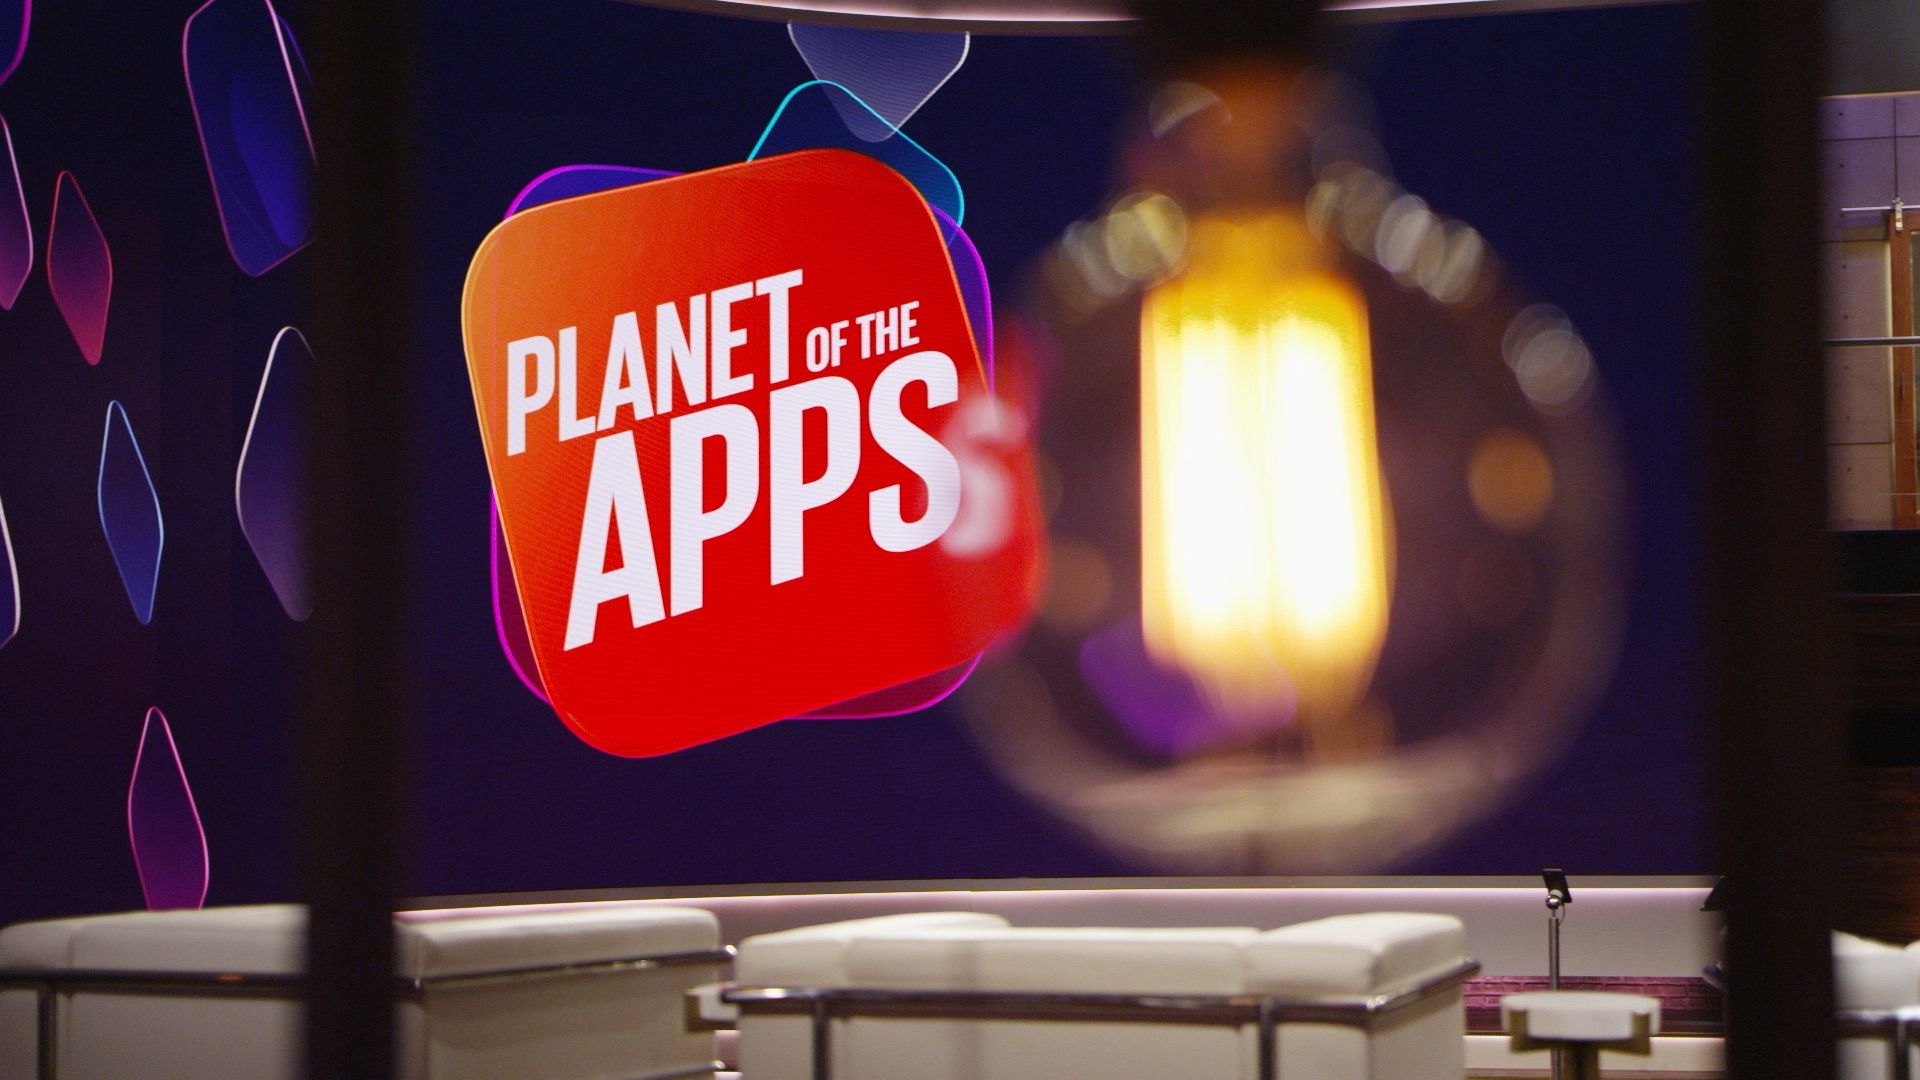 Planet of the Apps Backdrop